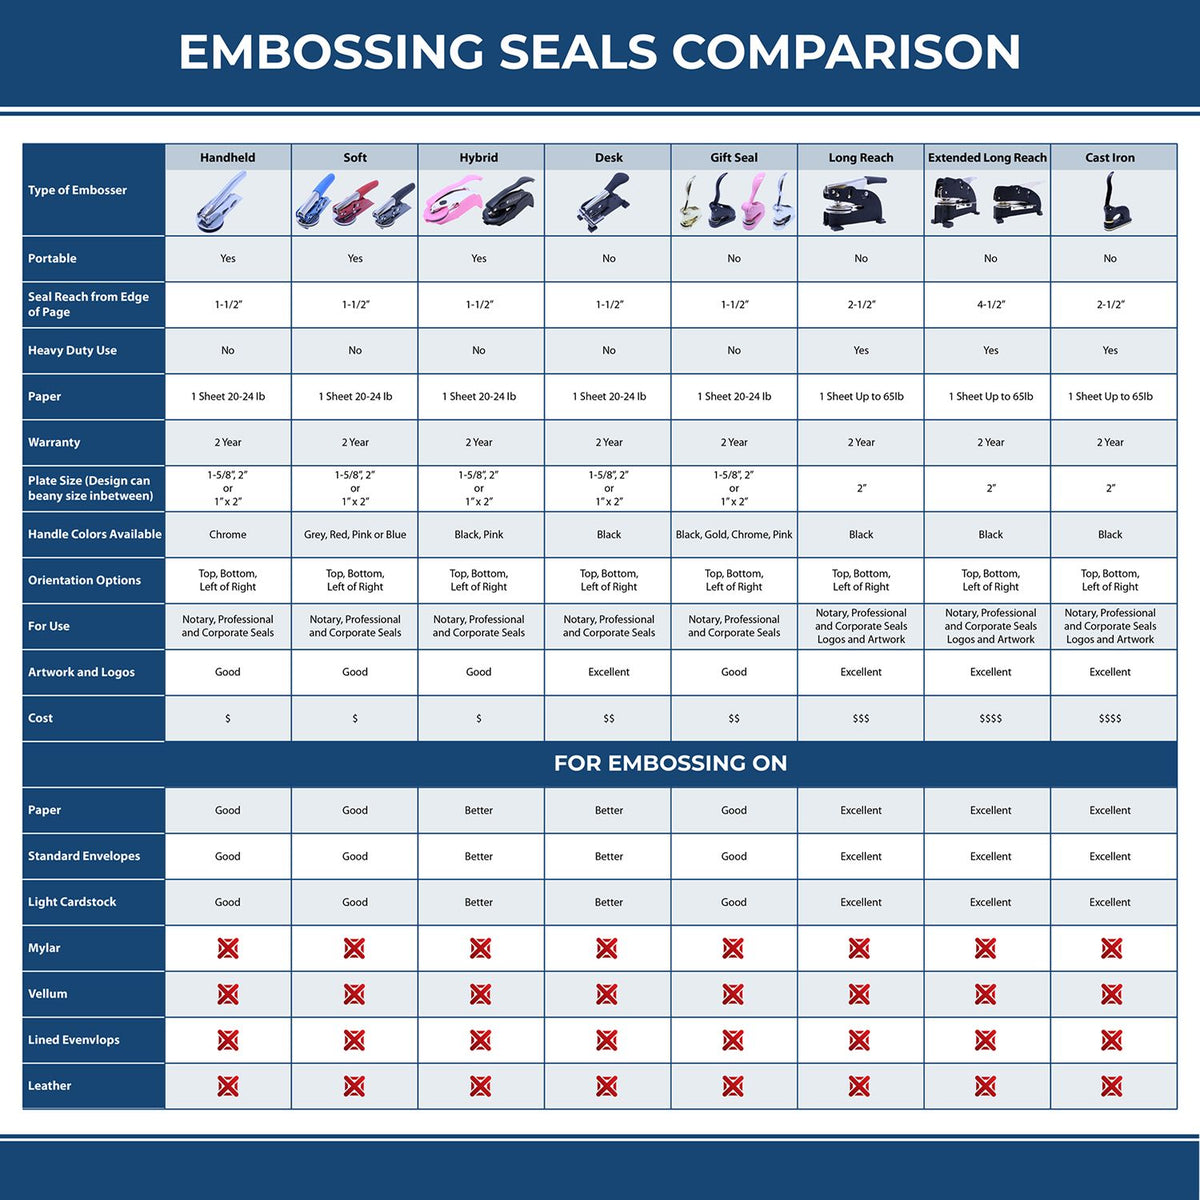 A comparison chart for the different types of mount models available for the Heavy Duty Cast Iron Texas Architect Embosser.